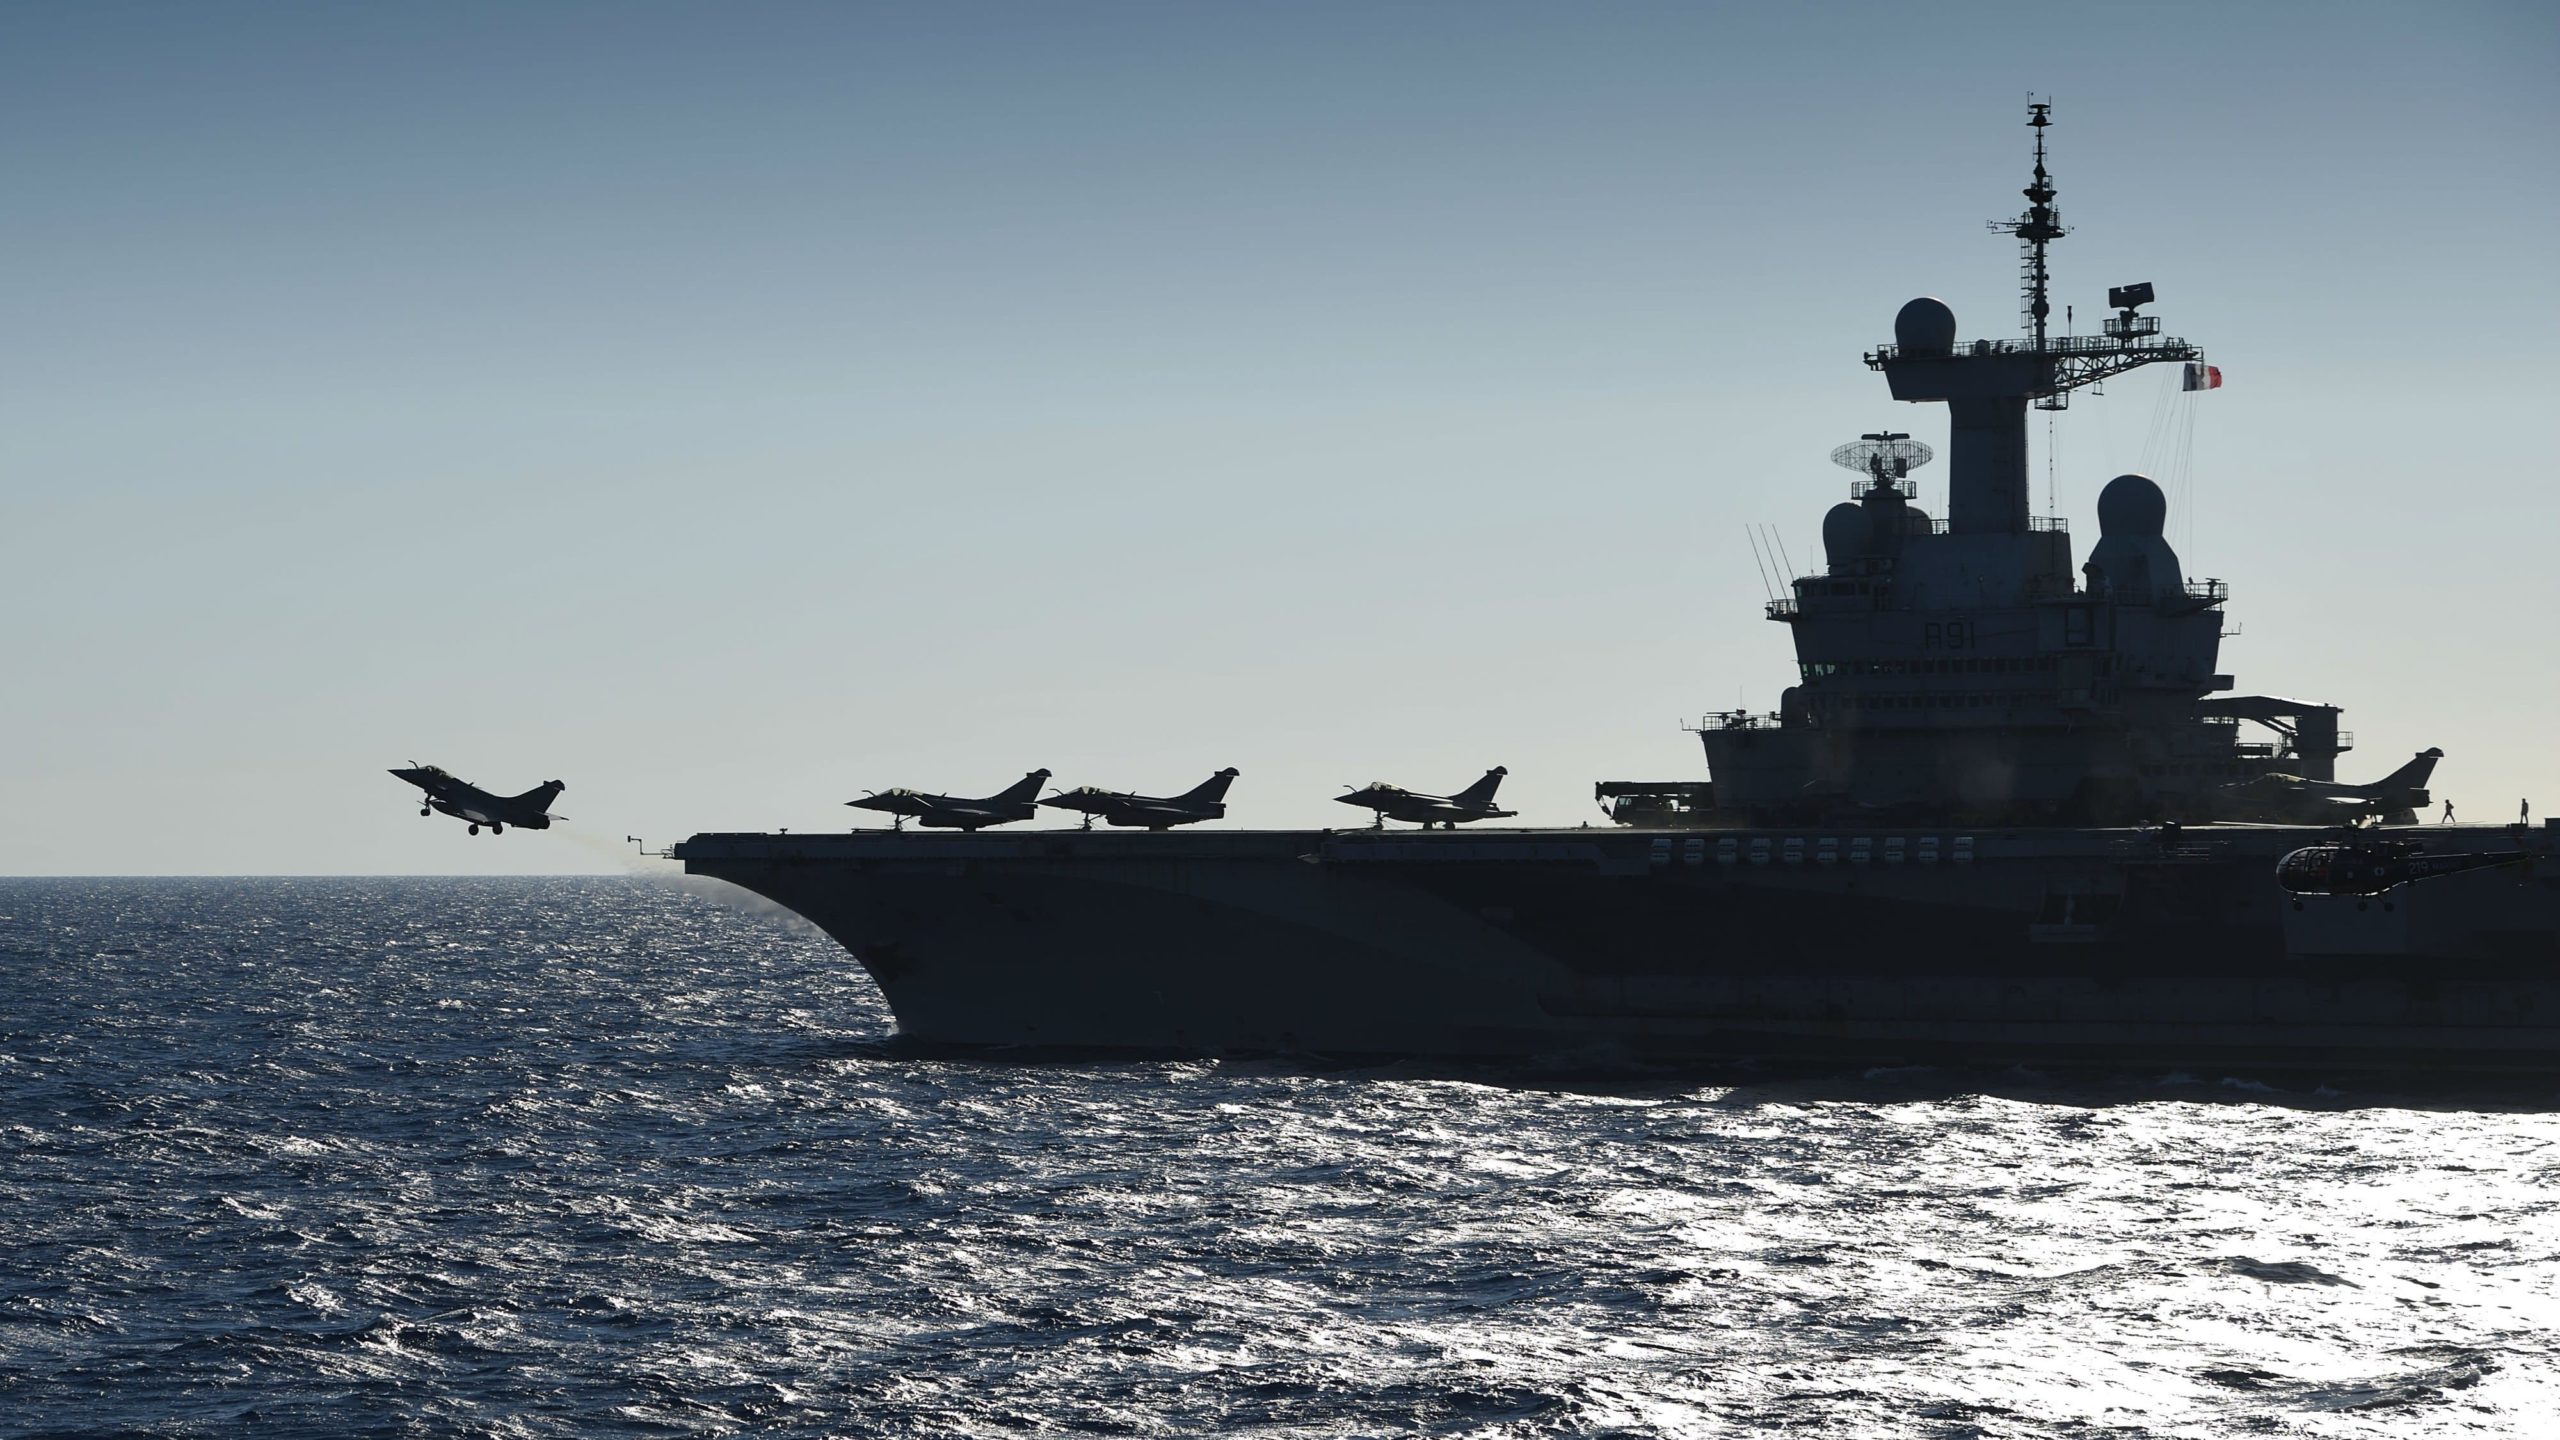 A rafale fighter jet takes off from the French aircraft carrier Charles de Gaulle.